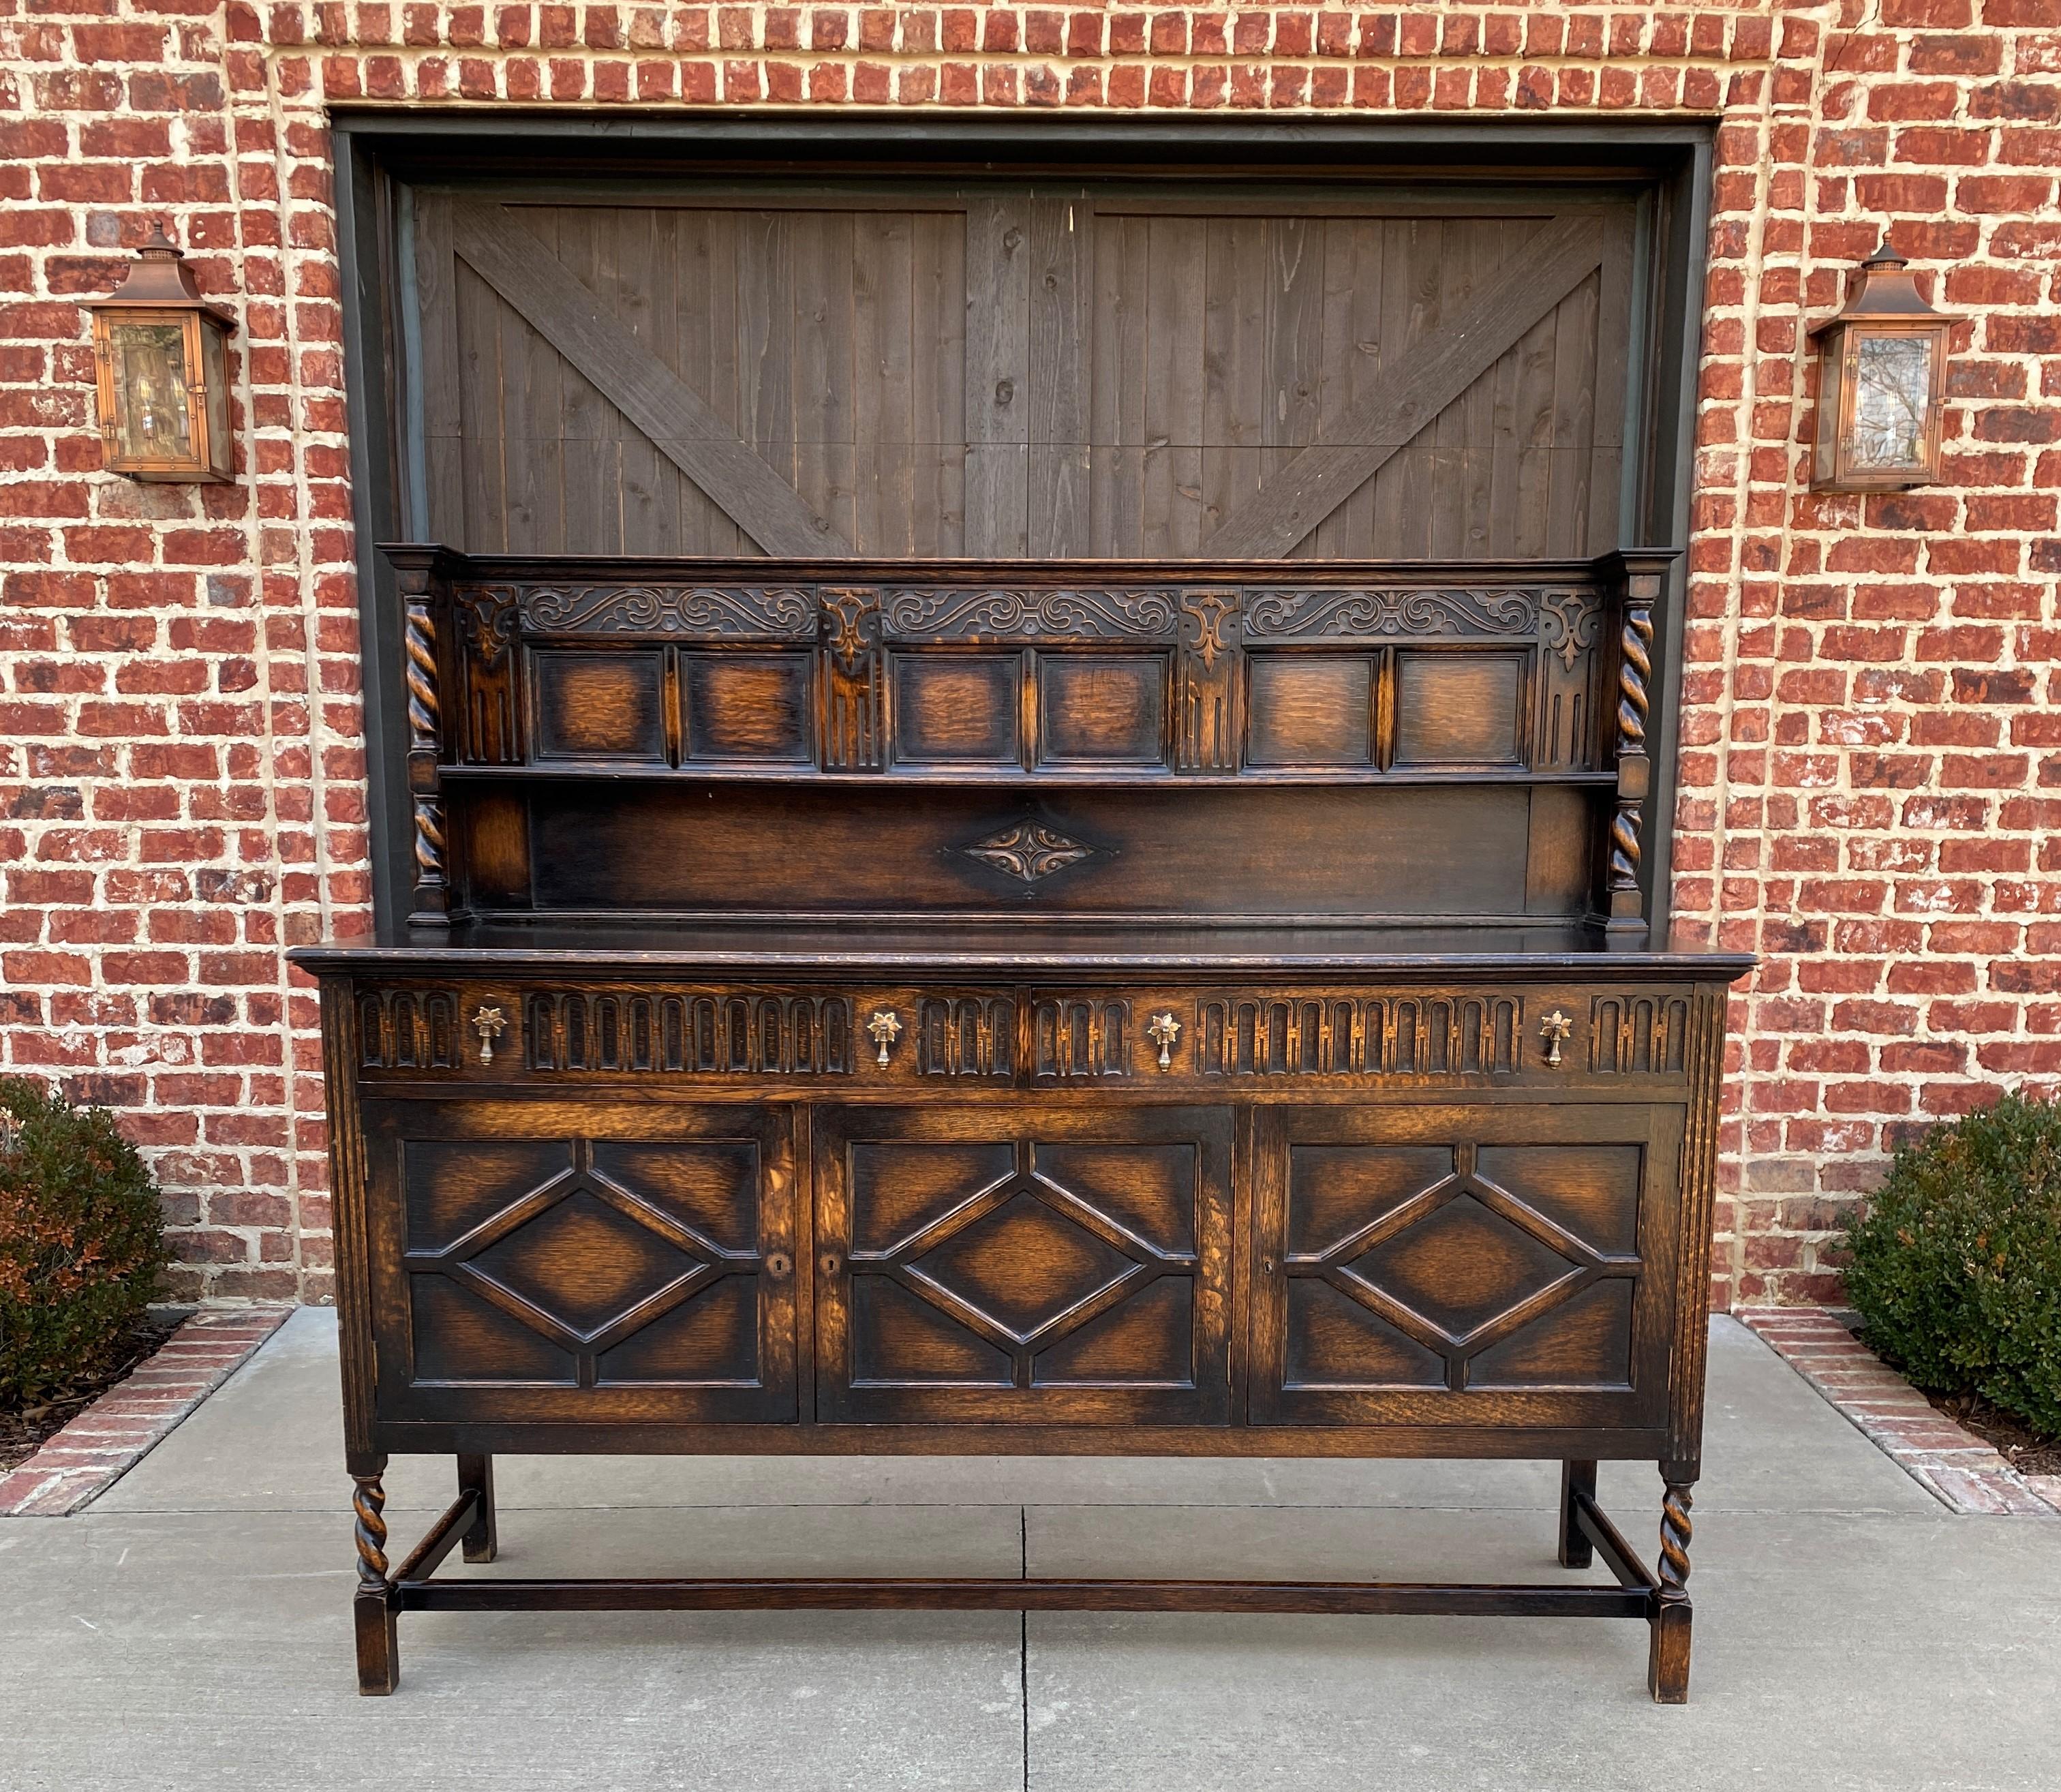 Gorgeous Antique English oak Jacobean barley twist server, sideboard or buffet with center drawers and lower cabinets~~c. 1890s


Full of character and classic English style sideboard or server with barley twist legs and upper posts~~fill it with